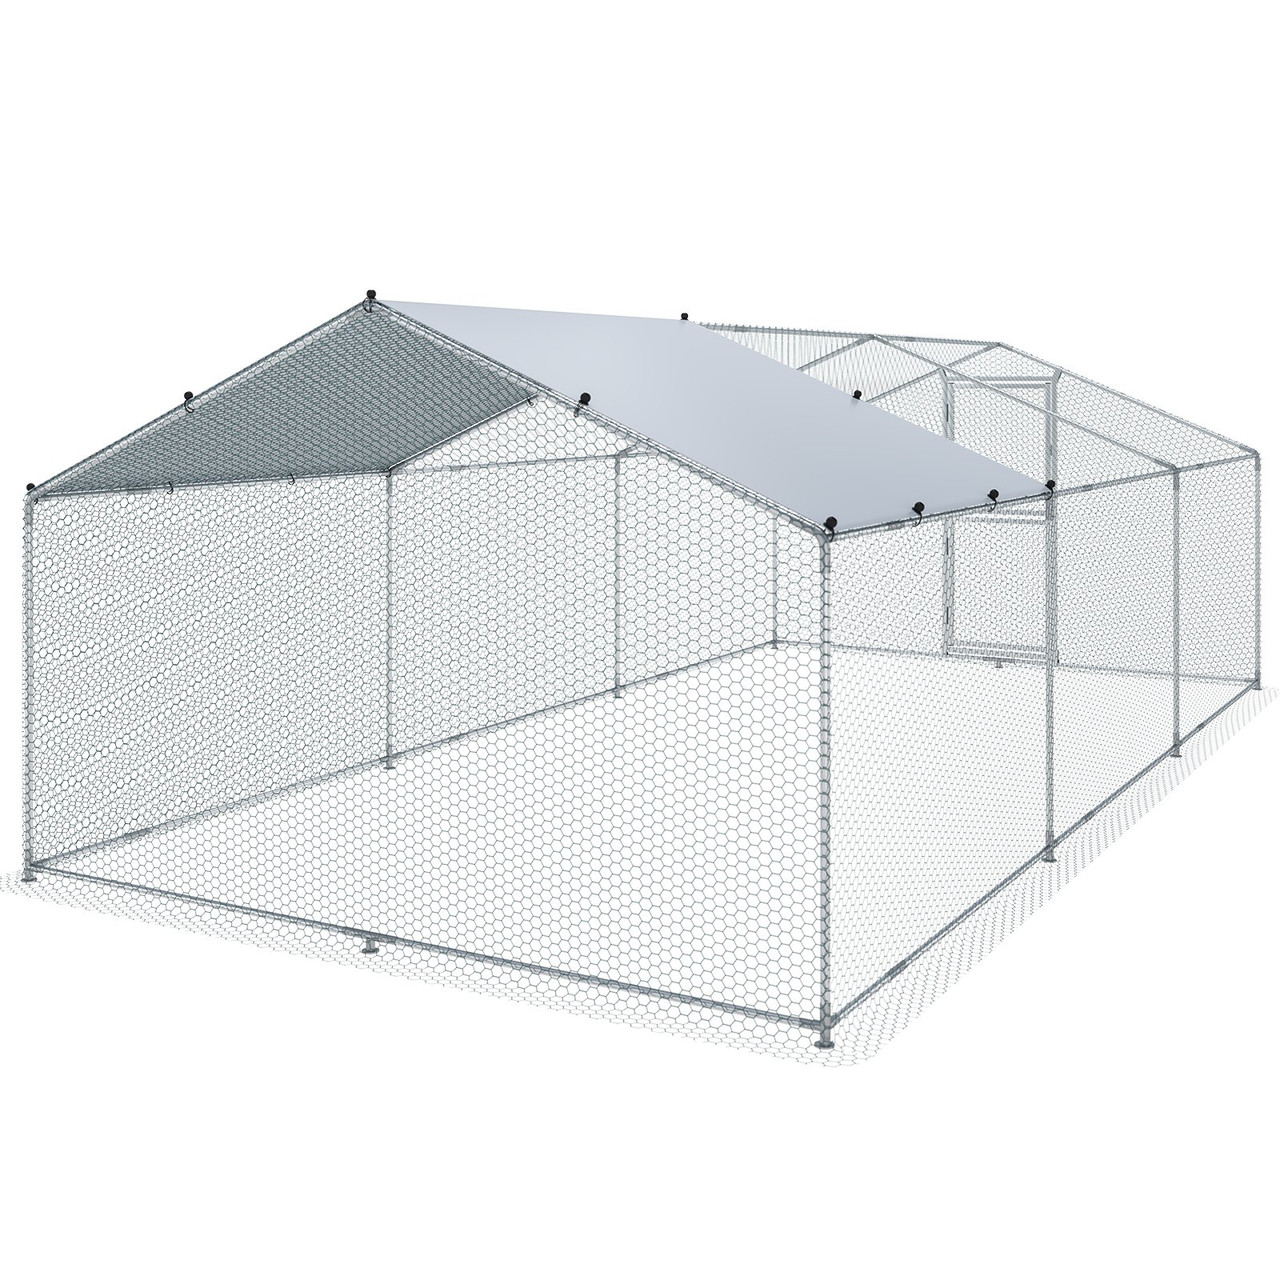 Large Metal Chicken Coop with Run, Walkin Poultry Cage for Yard, Waterproof Cover, 19.7 x 9.8 x 6.6 ft, Peaked Roof for Hen House, Duck Coop and Rabbit, Silver